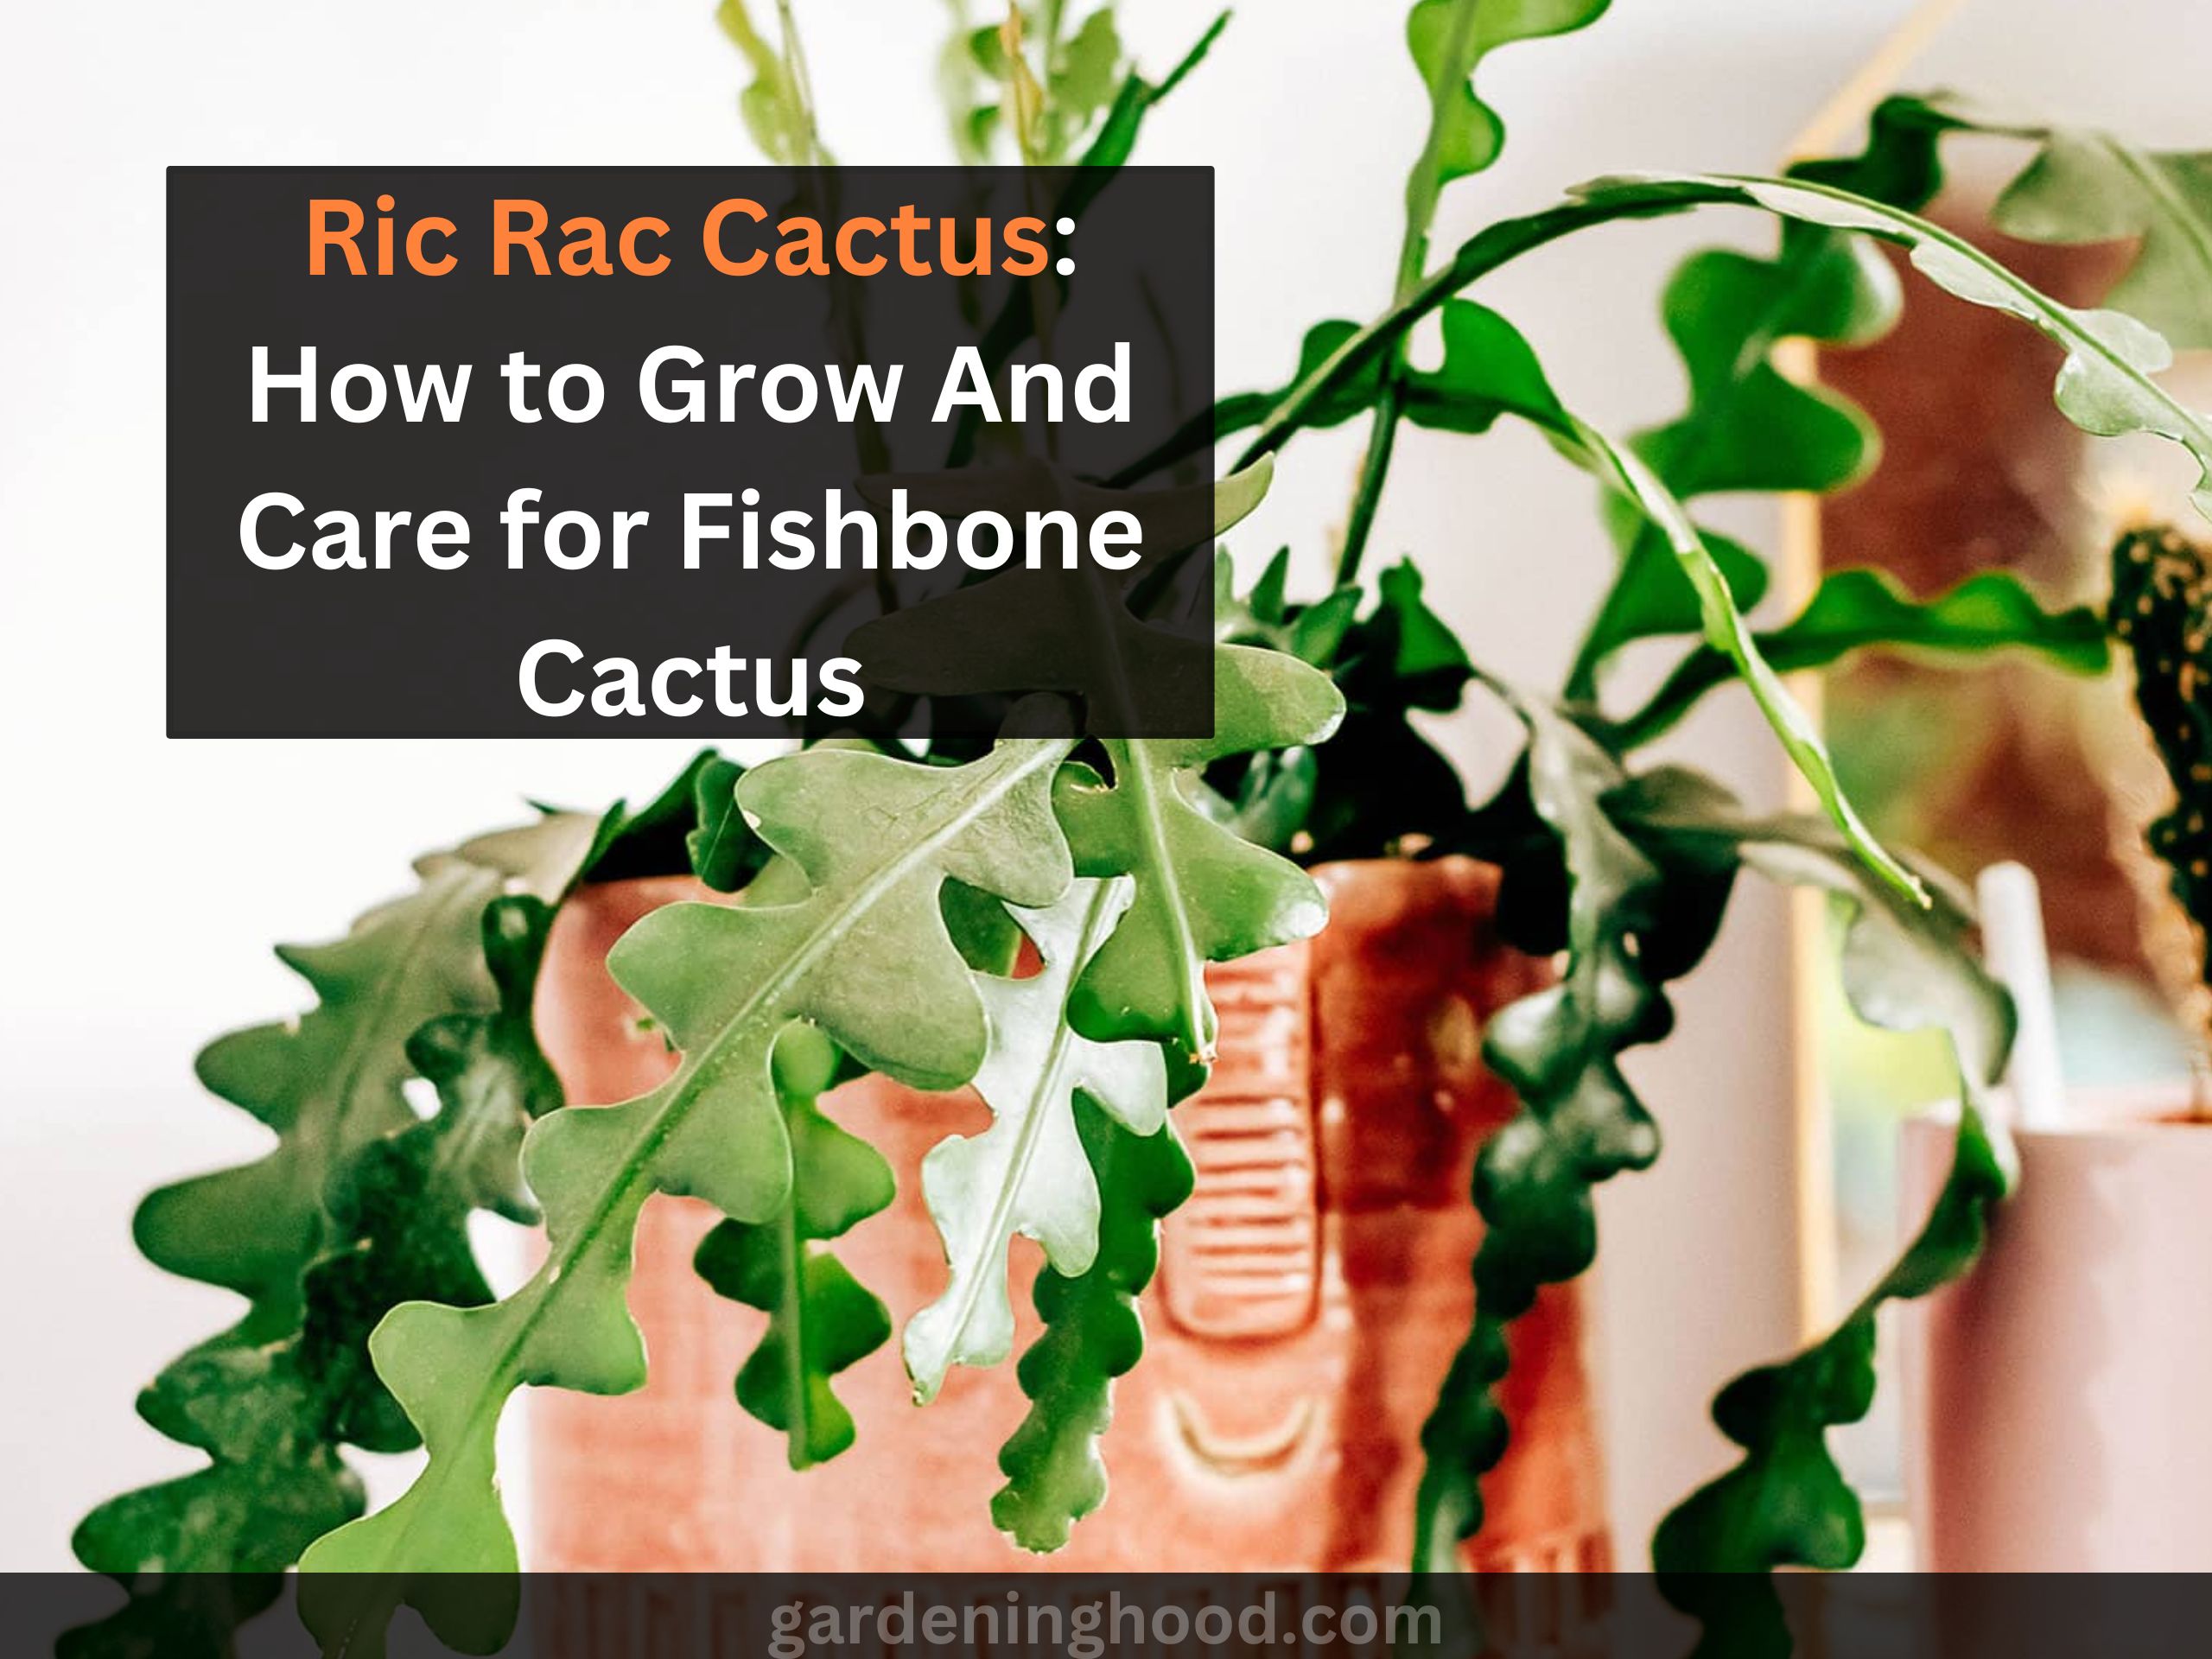 Ric Rac Cactus: How to Grow And Care for Fishbone Cactus